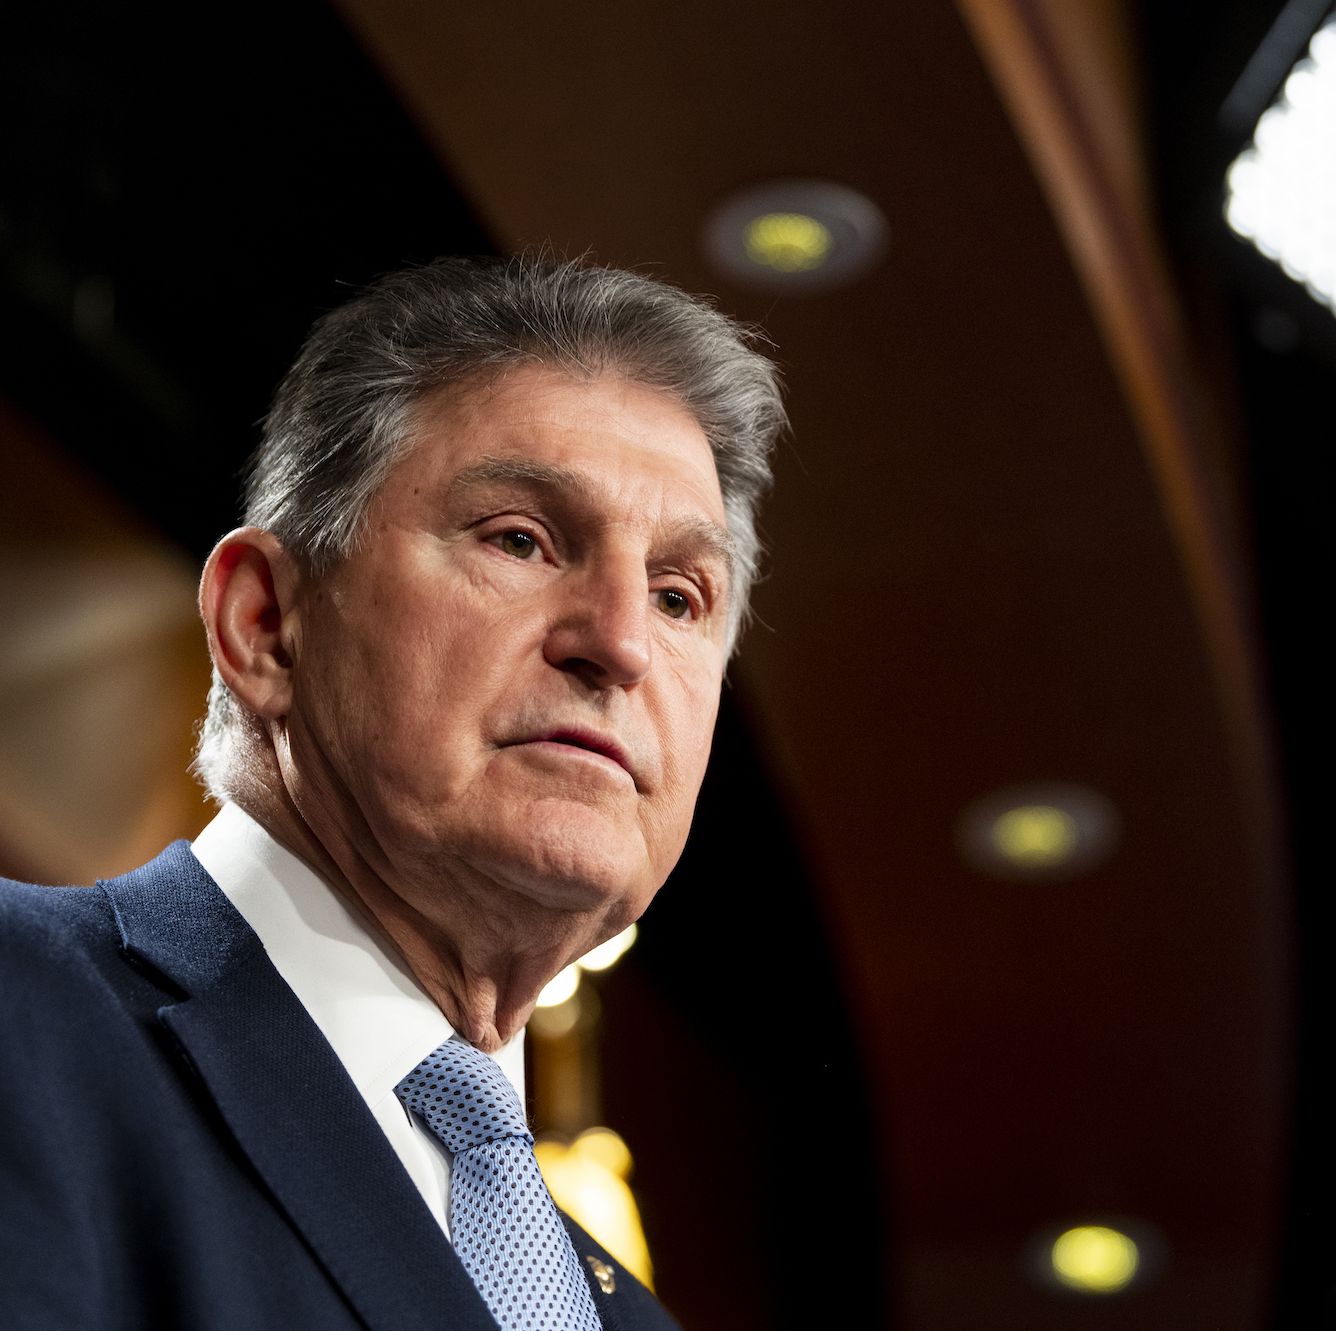 Joe Manchin Is a Walking, Talking Advertisement for the Real Consequences of Citizens United